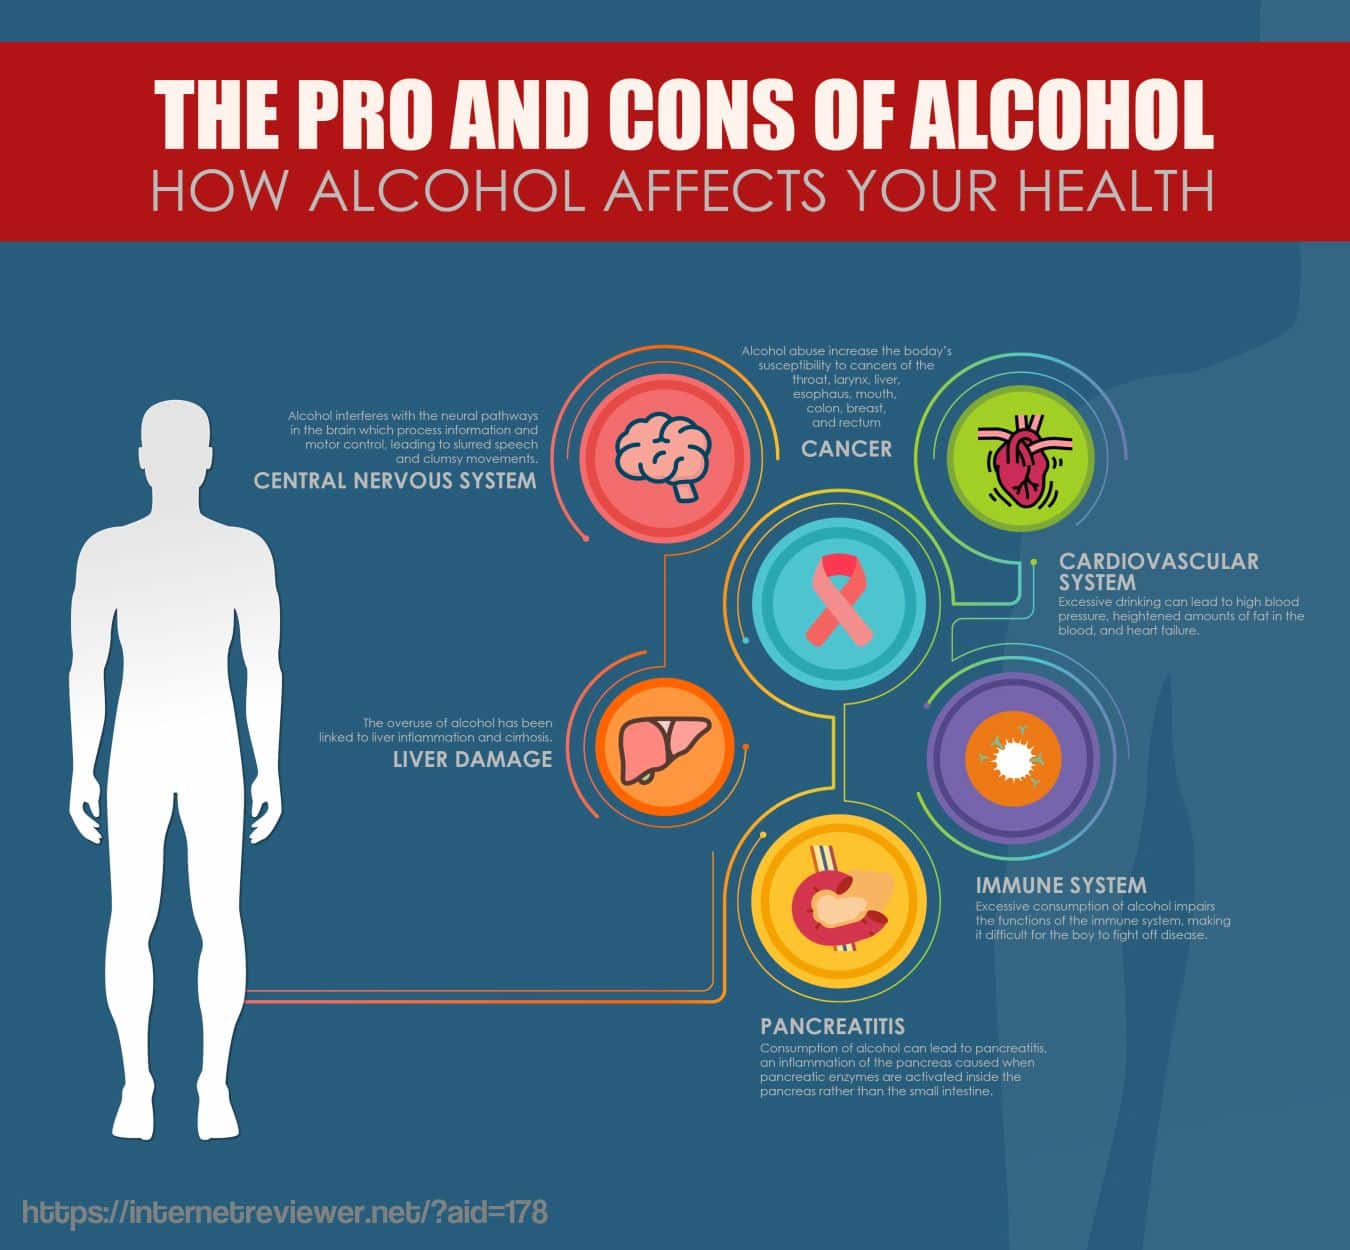 effects of alcohol